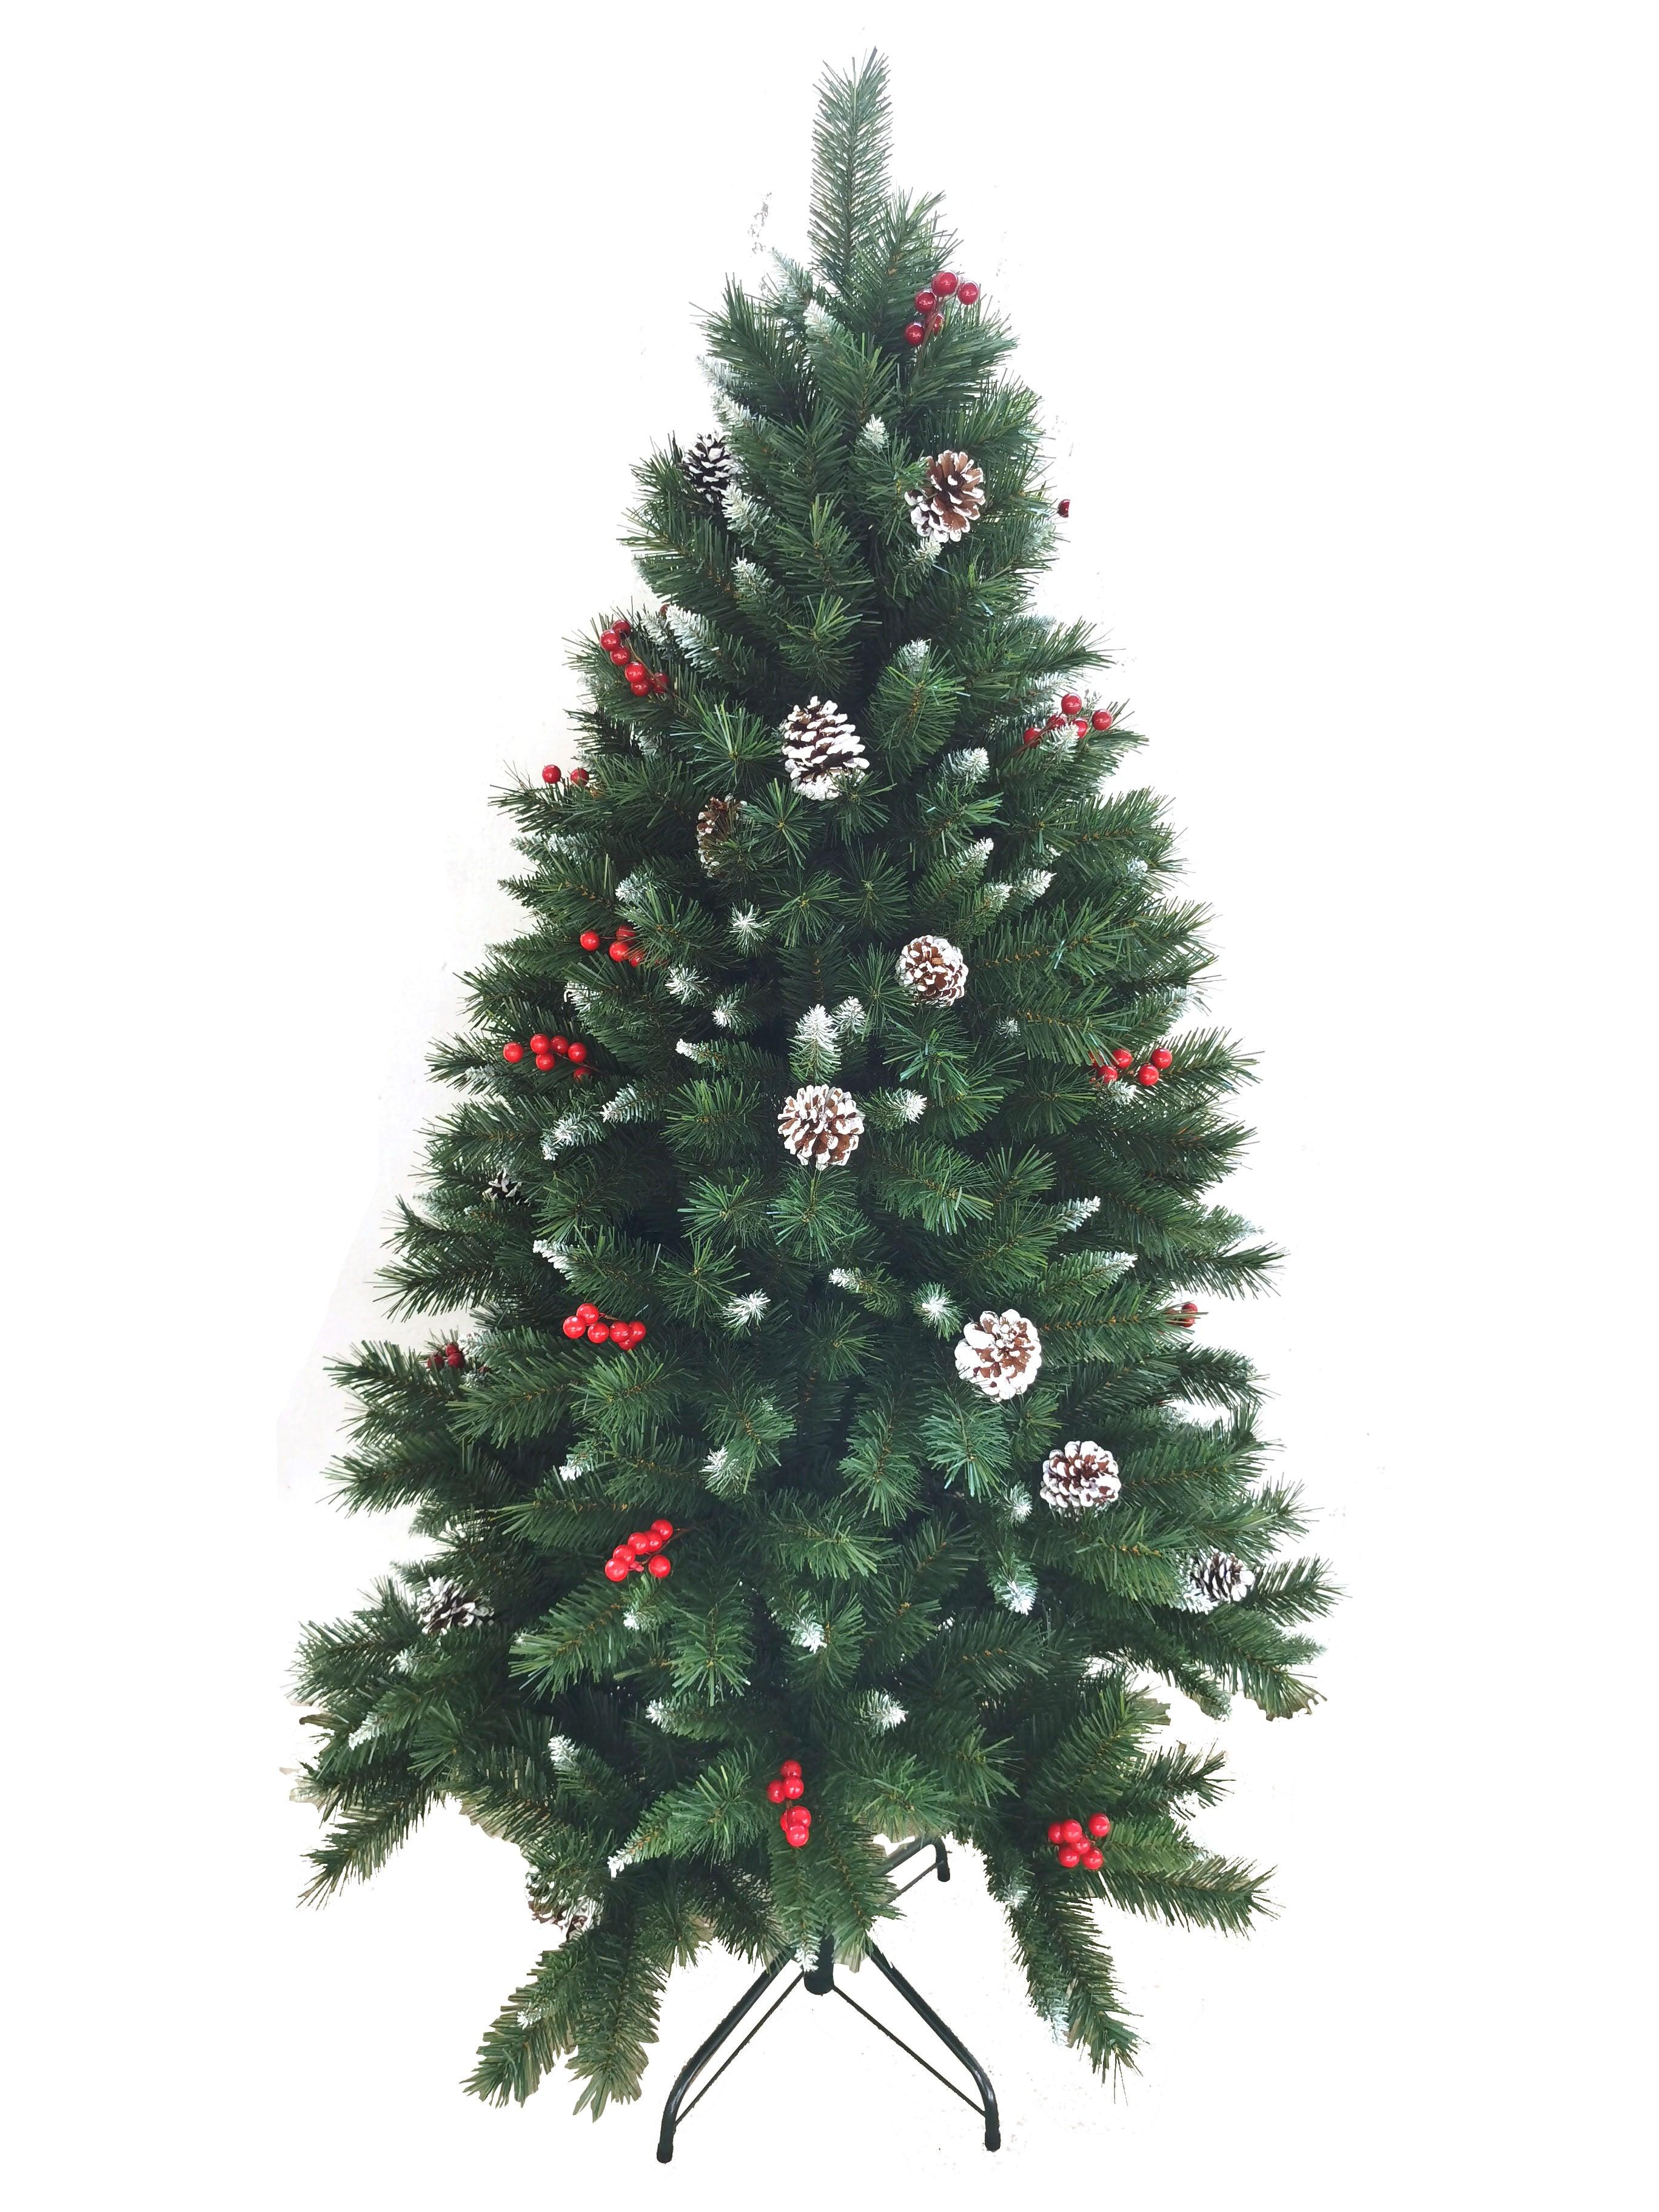 240cm / 8ft Red Berry Christmas Tree - General Hardware Supplies Homevalue